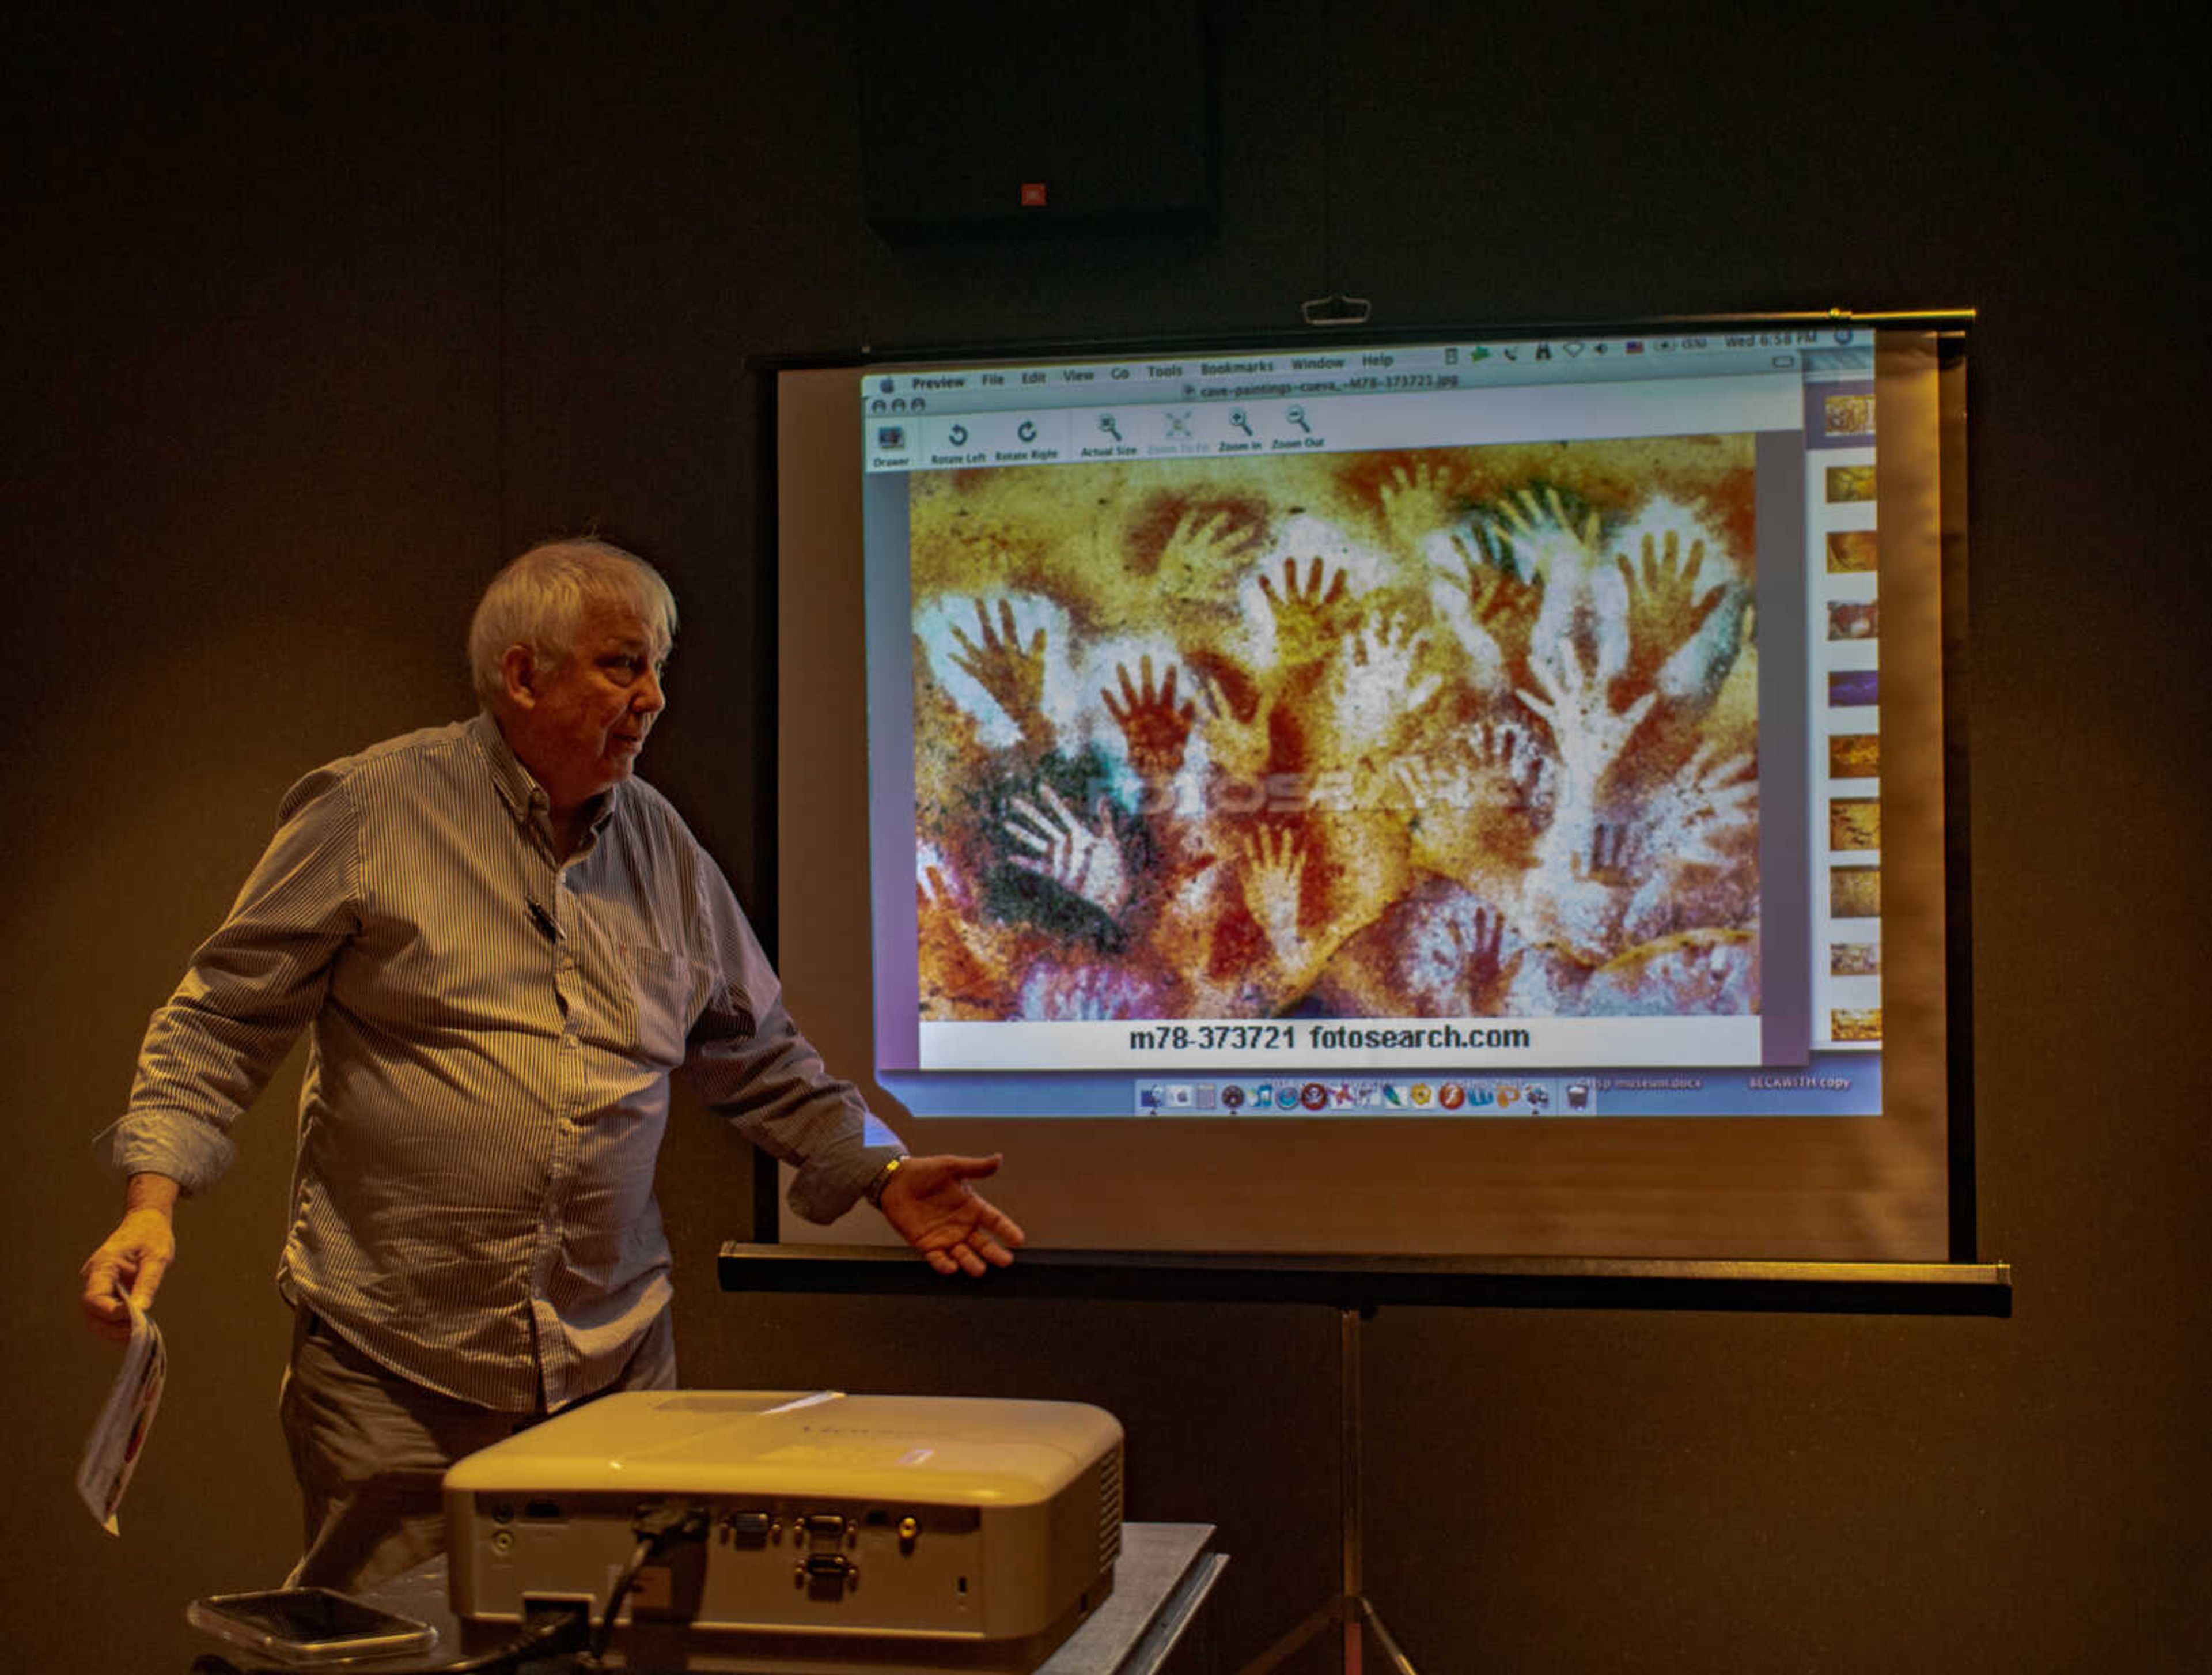 Southeast’s River Campus hosted Dave Carter, who directed a discussion for artists and those who appreciate art at the Rosemary Berkel and Harry L. Crisp II Museum on Tuesday, Aug. 20.